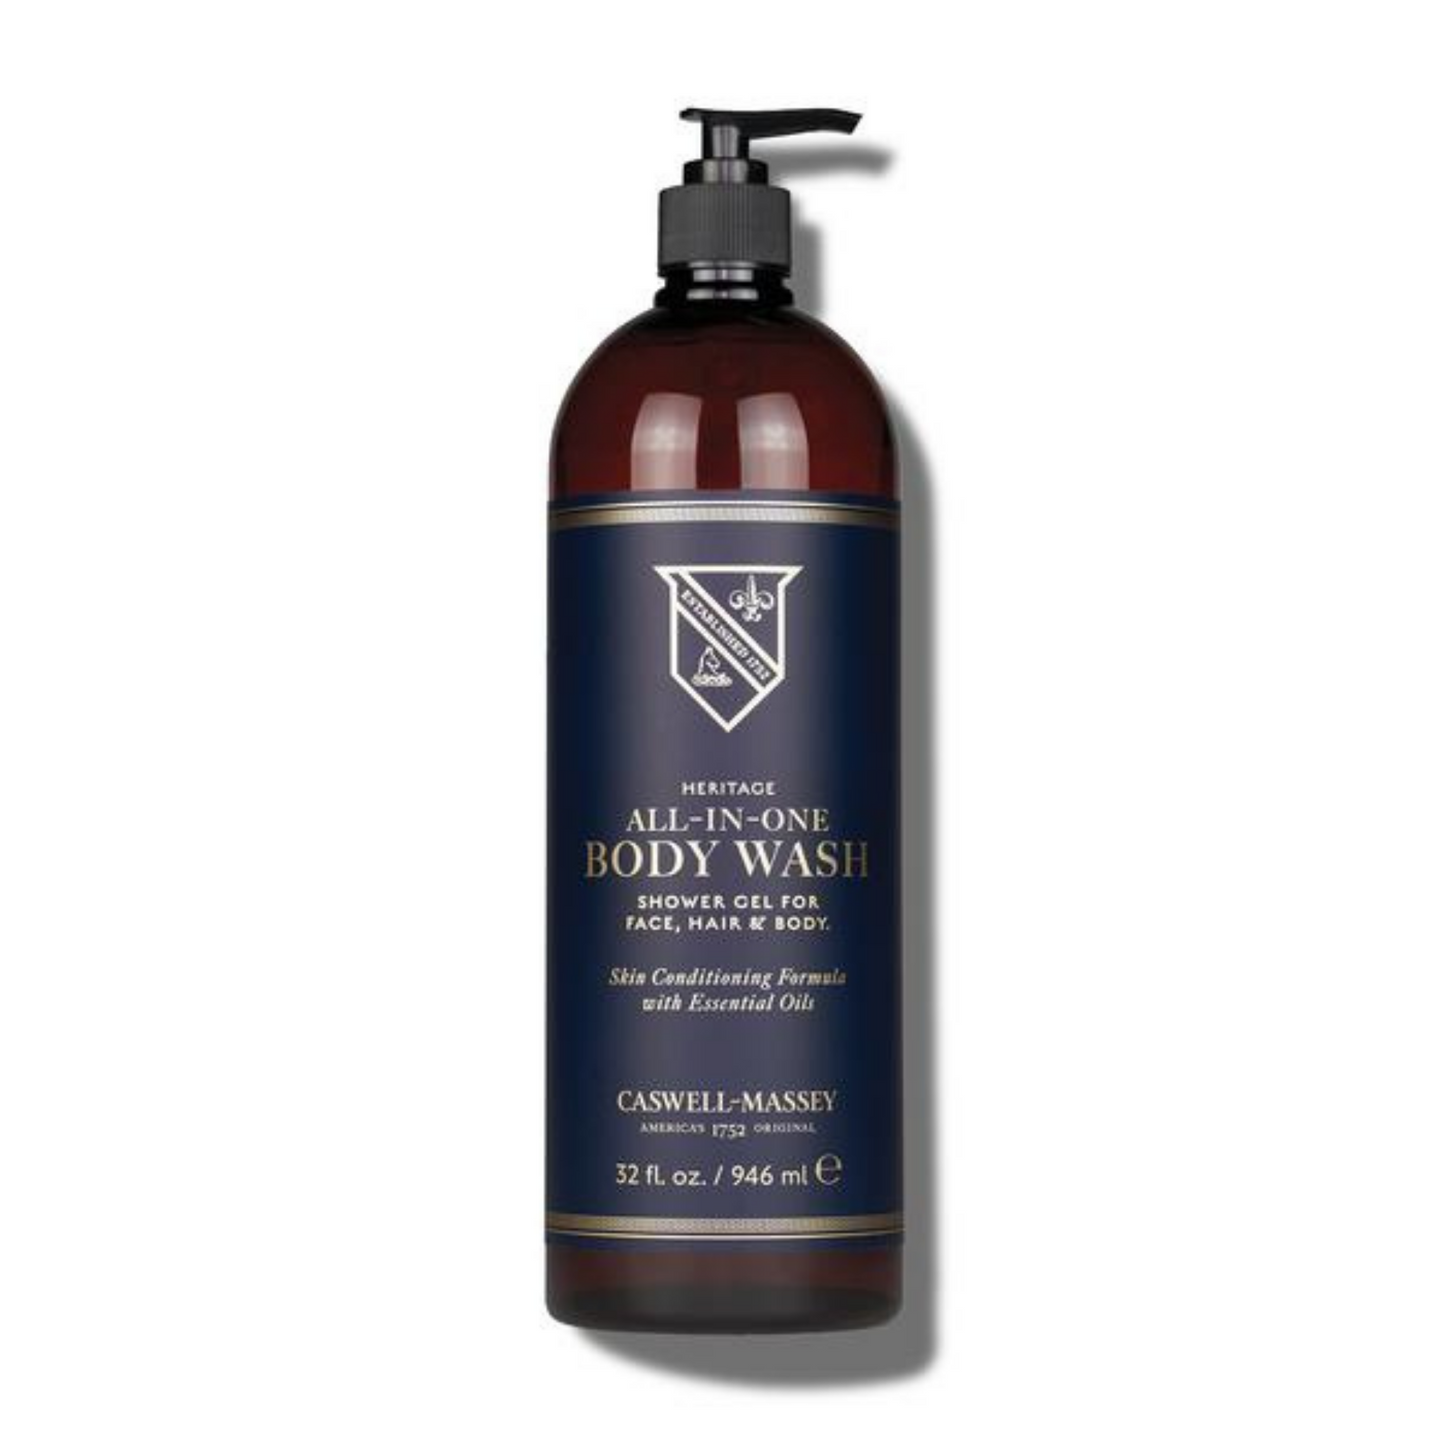 Primary Image of Heritage All-In-One Body Wash